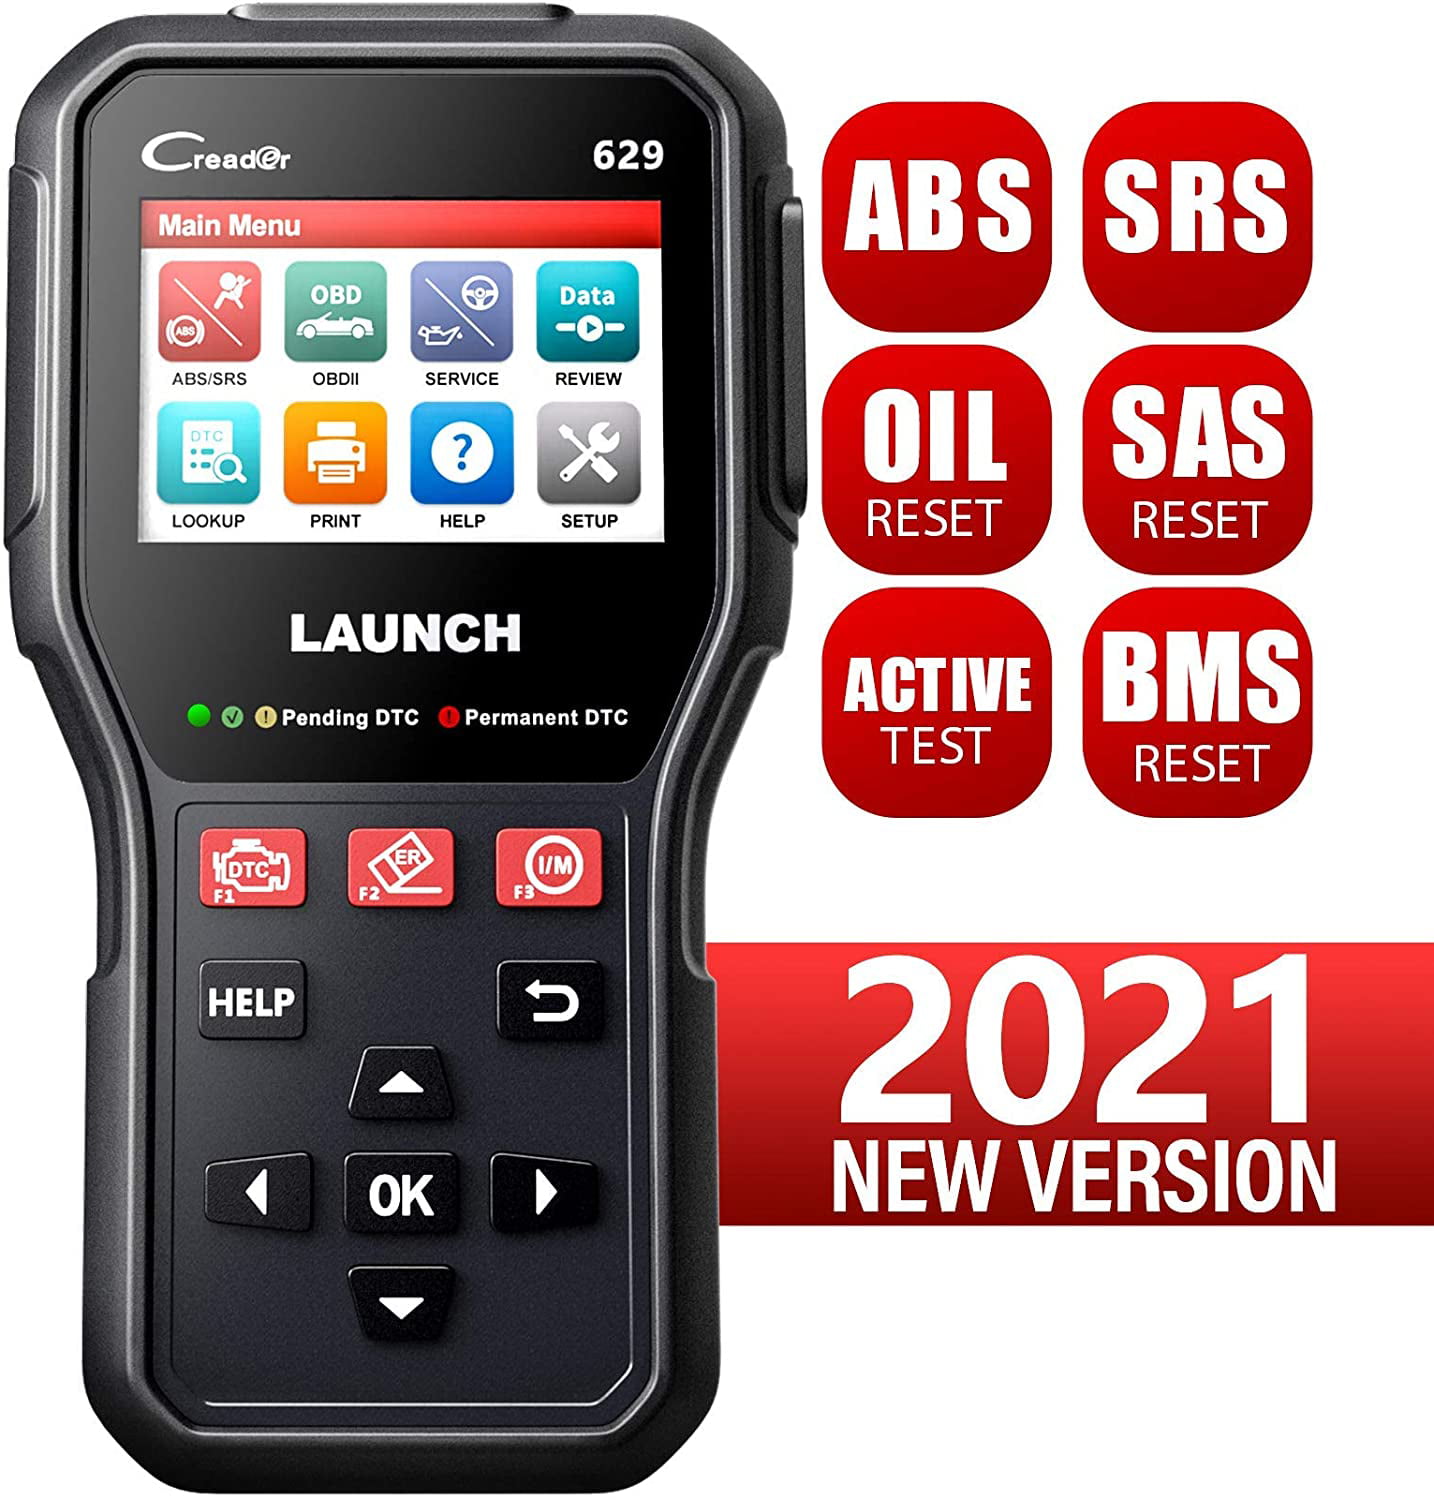 ABS & SRS Diagnostic Tool Full OBD2 Functions scan Tool for DIYers Launch CR629 OBD2 Scanner Car Code Reader with Active Tests Oil/SAS Reset Lifetime Update